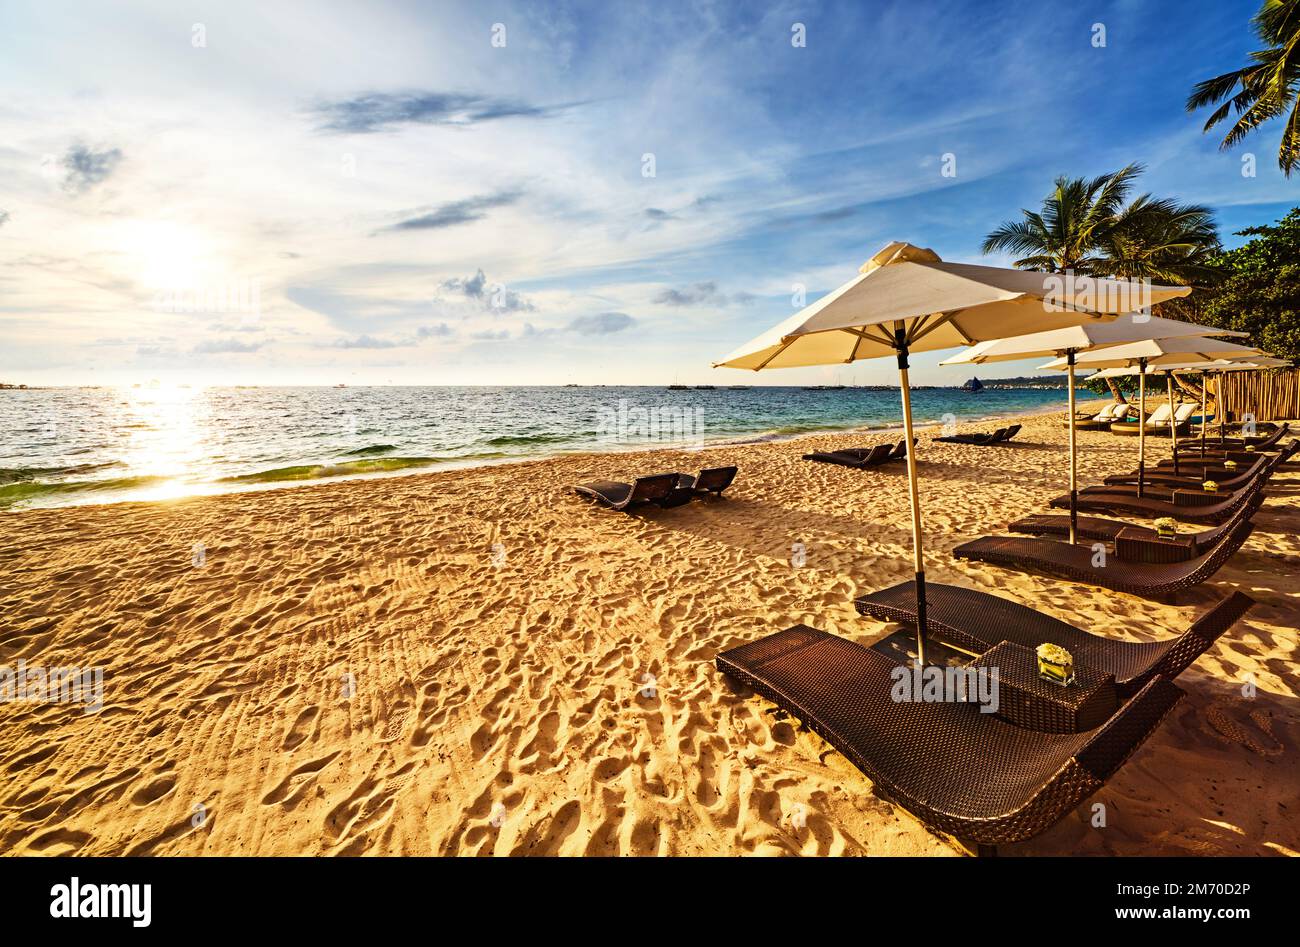 Tropical beach, Boracay Island, Philippines Banque D'Images